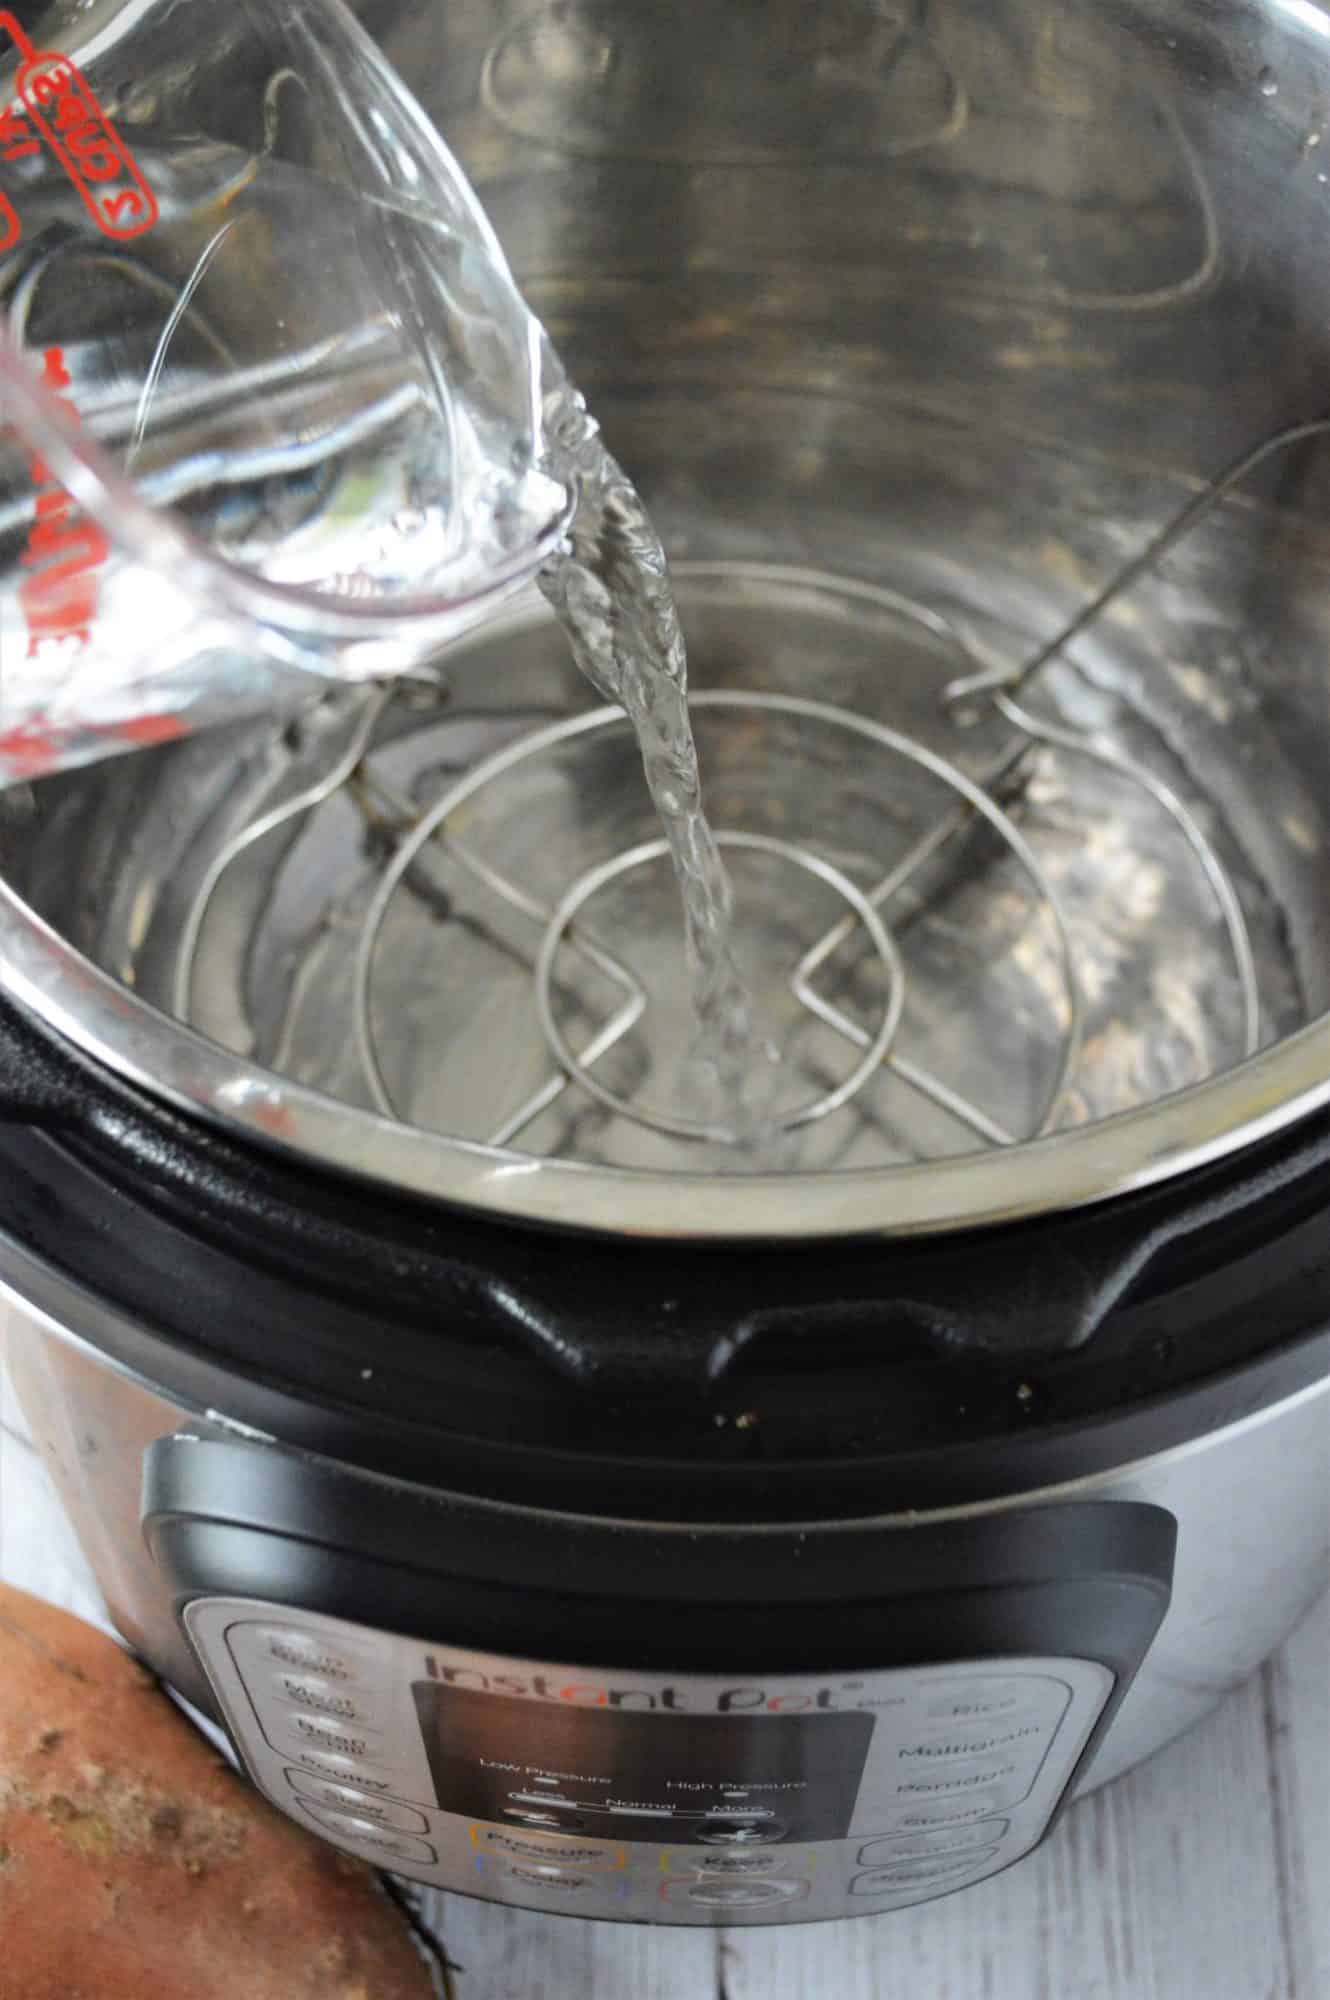 Water being poured into an Instant Pot